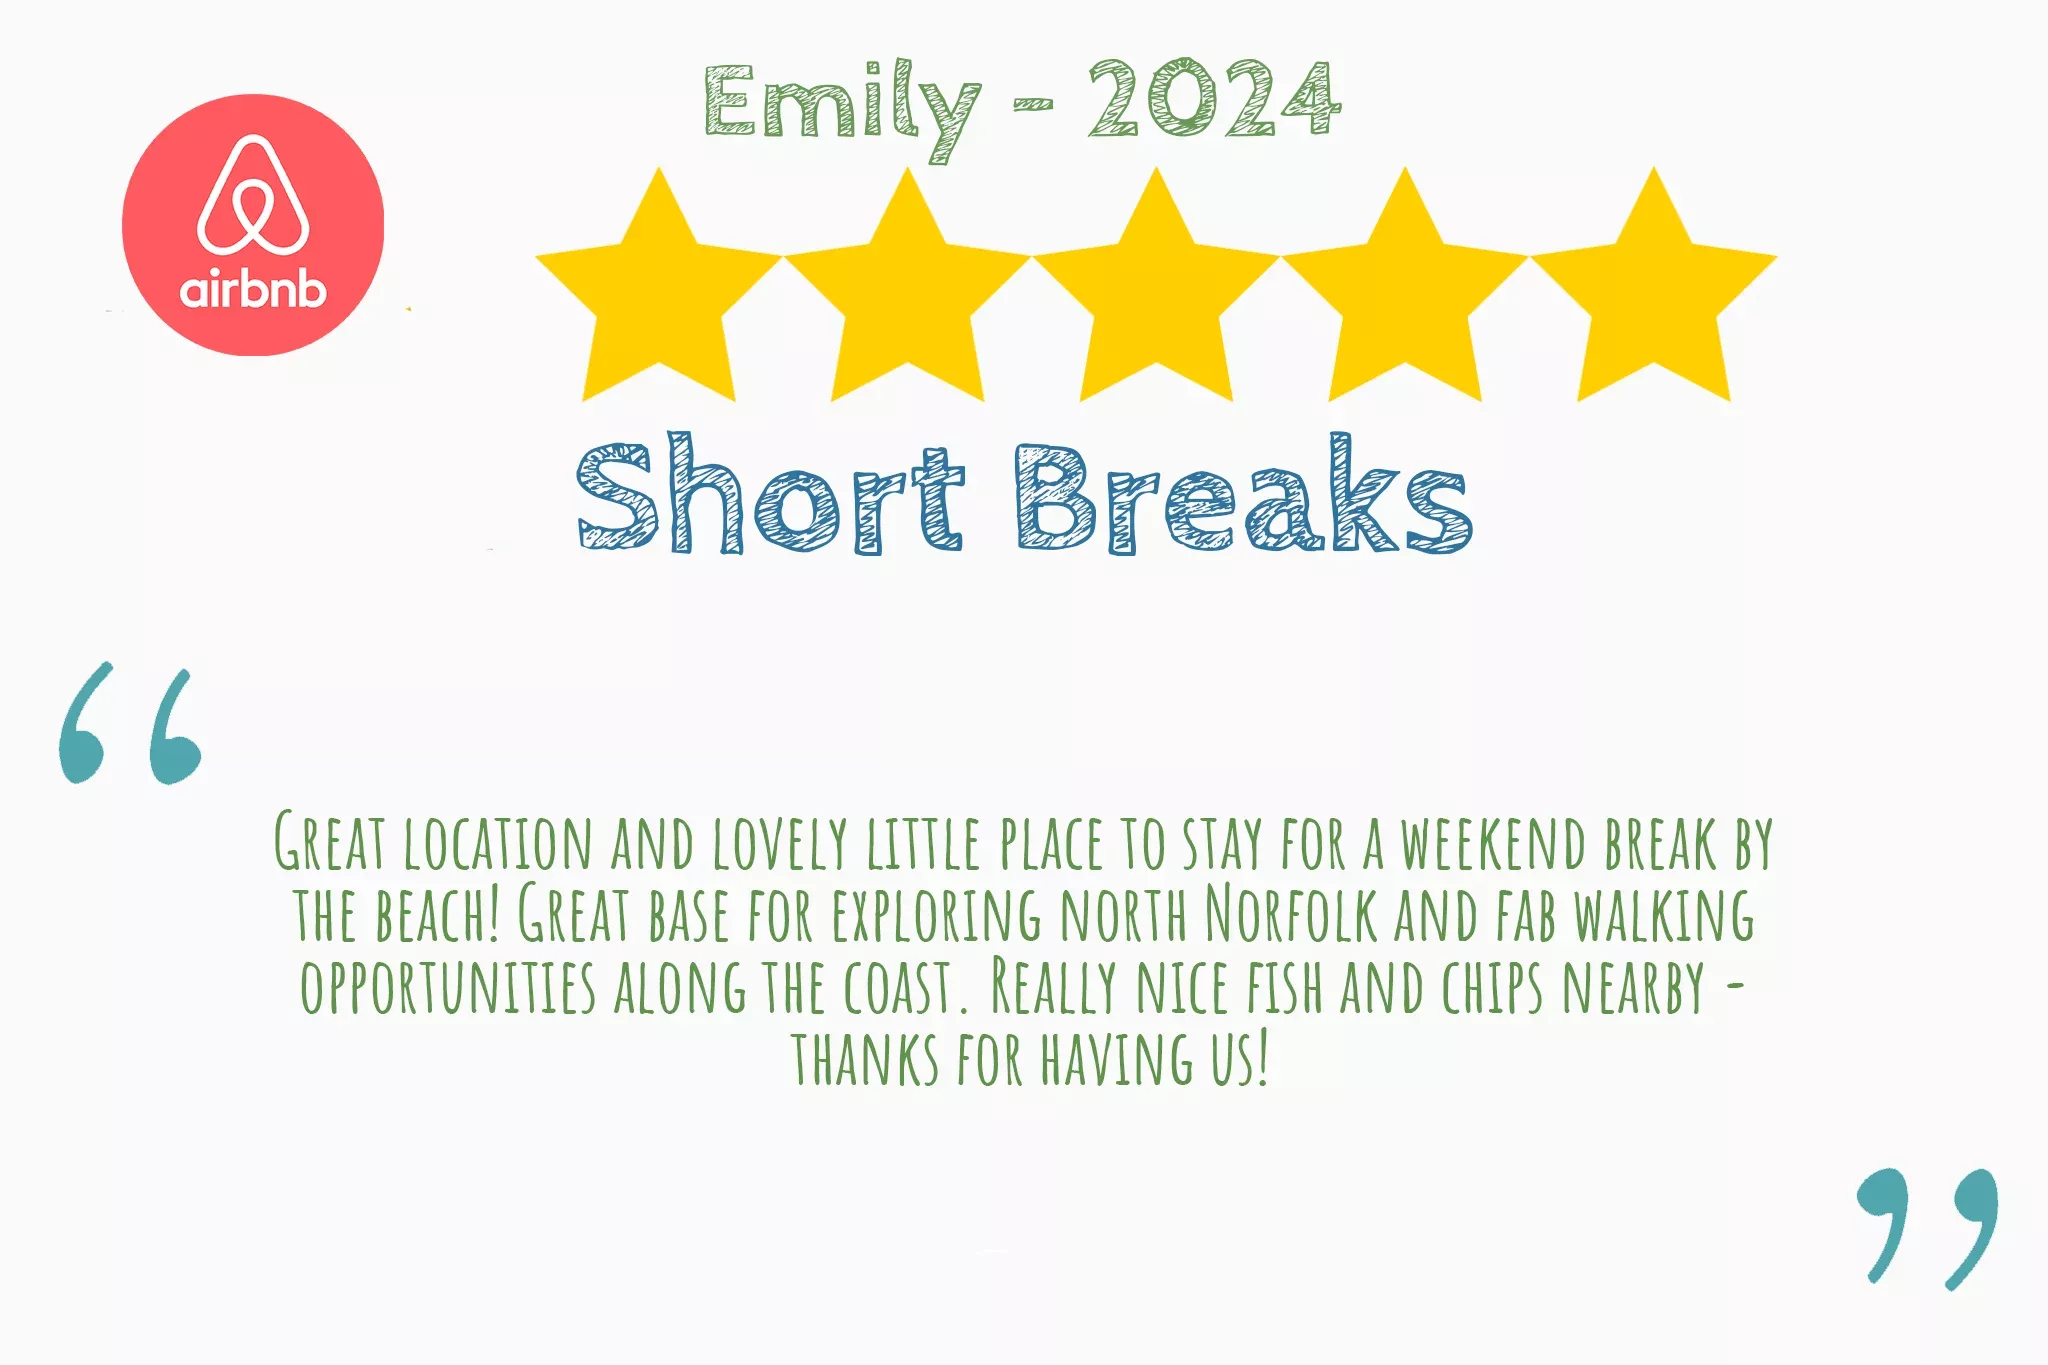 5 star review from Emily on Airbnb saying "Great location and lovely little place to stay for a weekend break by  the beach! Great base for exploring north Norfolk and fab walking  opportunities along the coast. Really nice fish and chips nearby -  thanks for having us!"